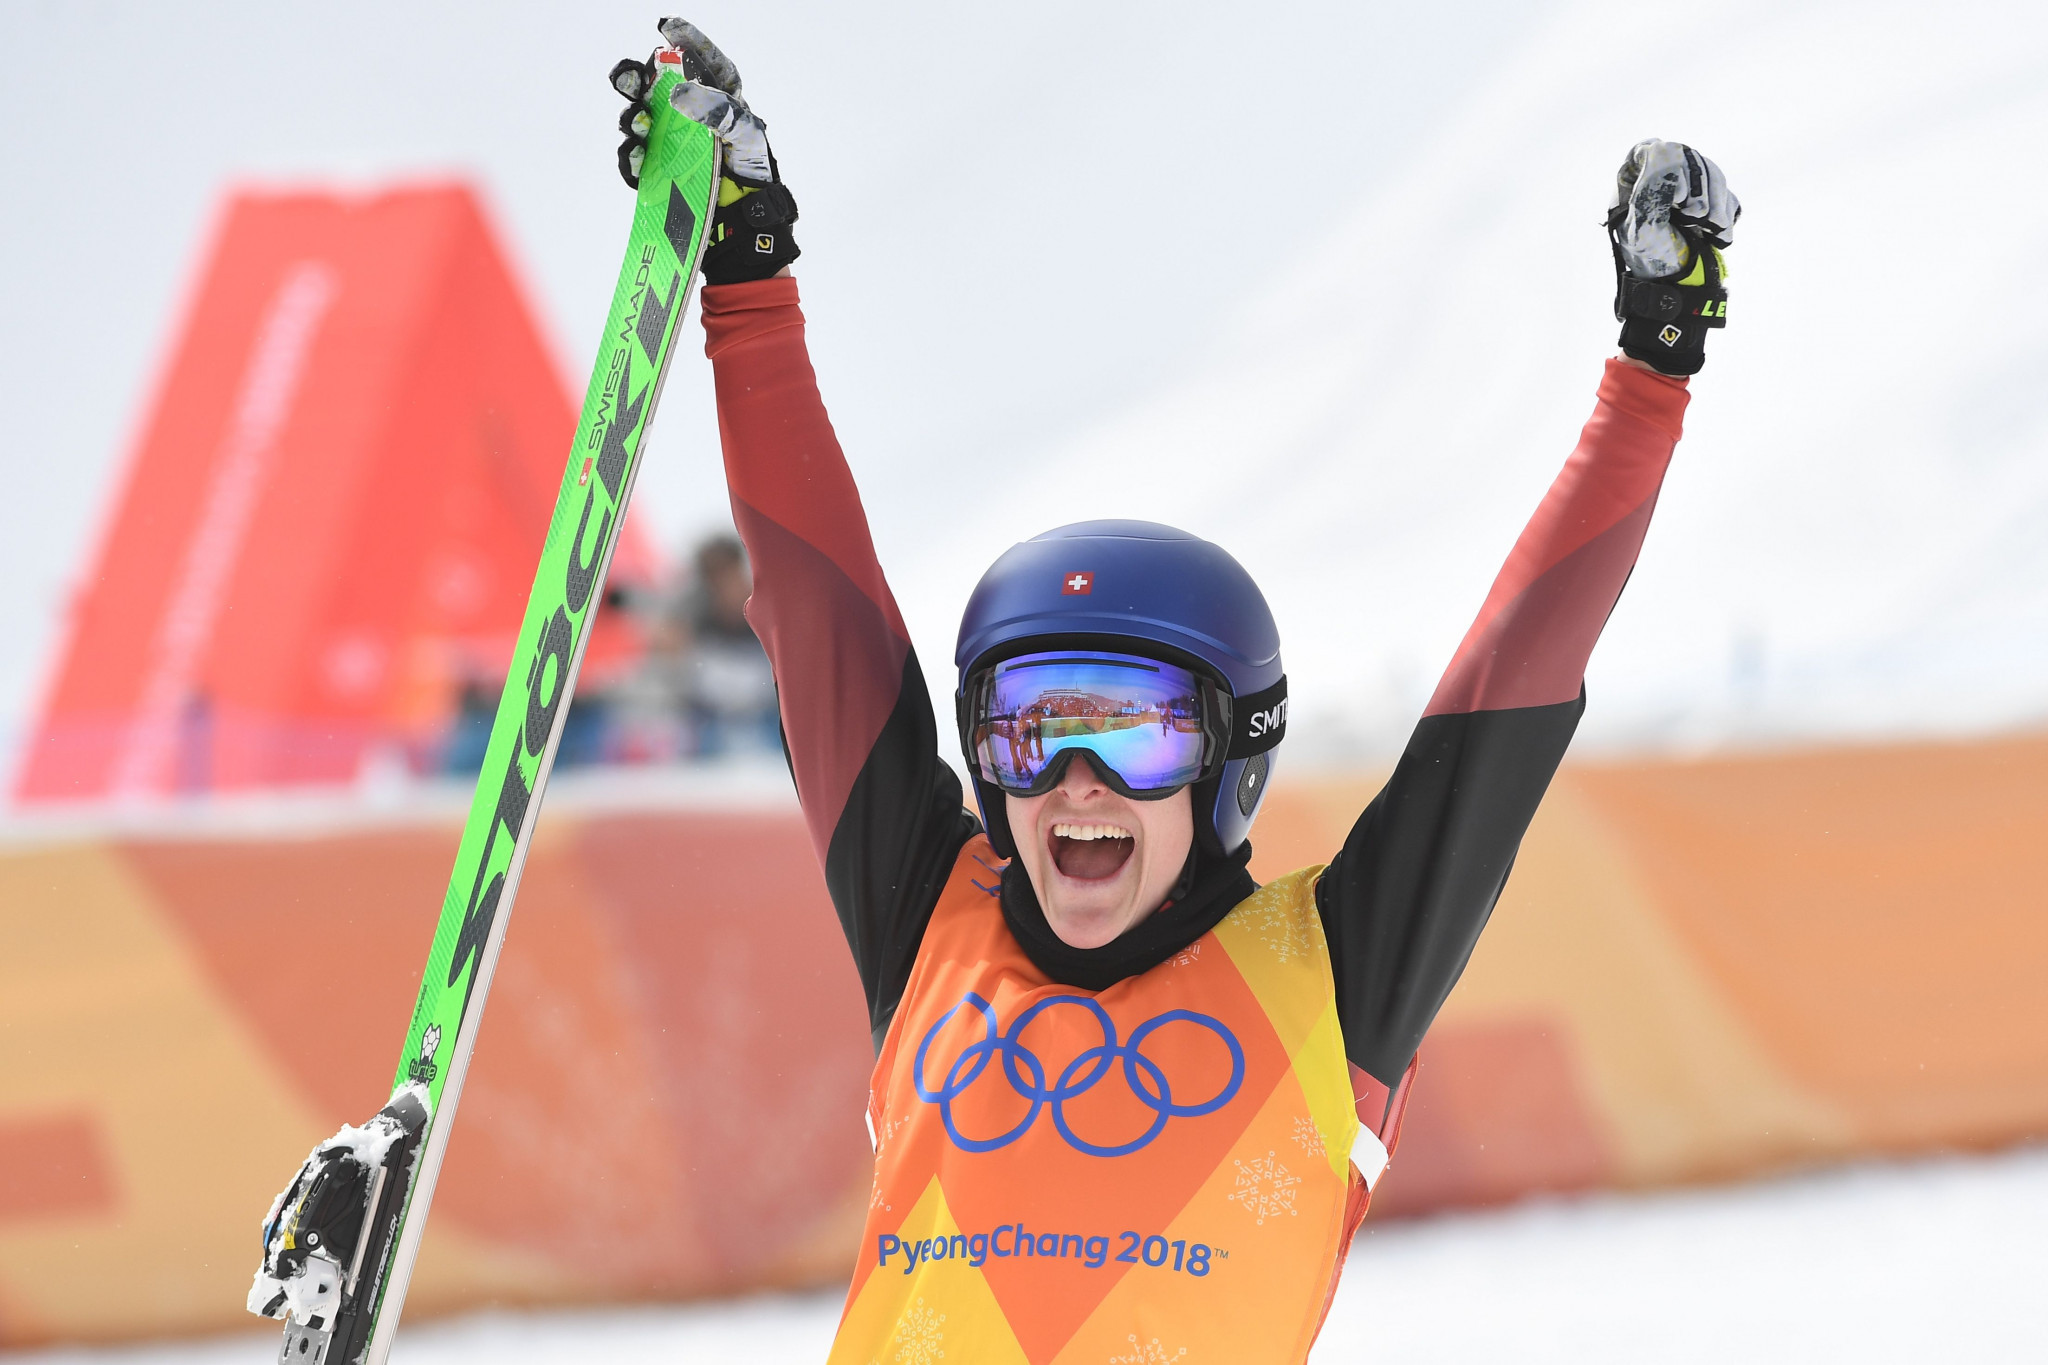 Smith leads women's qualifying as high winds force cancellation of second event at FIS Ski Cross World Cup